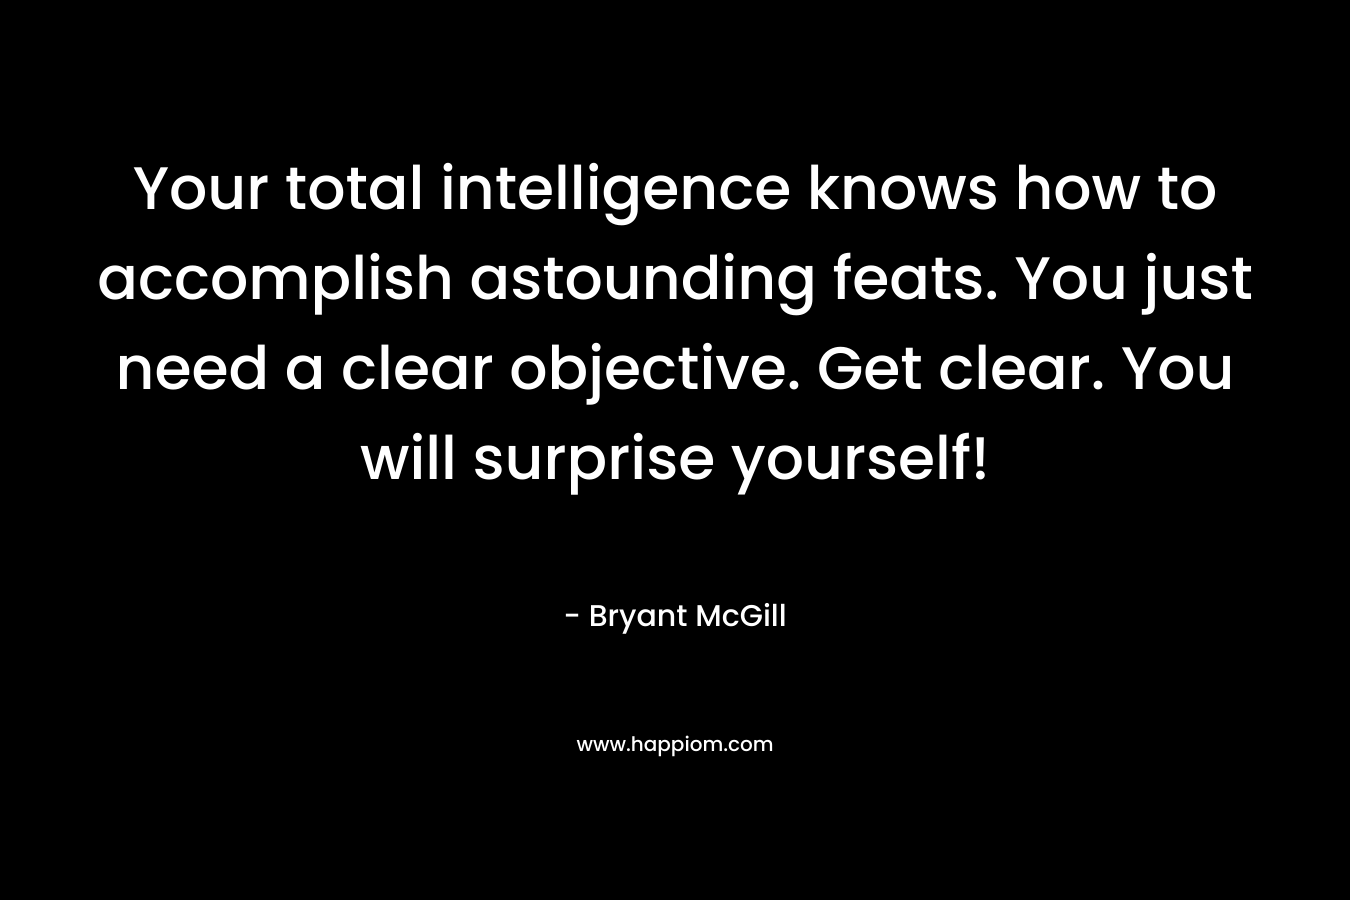 Your total intelligence knows how to accomplish astounding feats. You just need a clear objective. Get clear. You will surprise yourself!